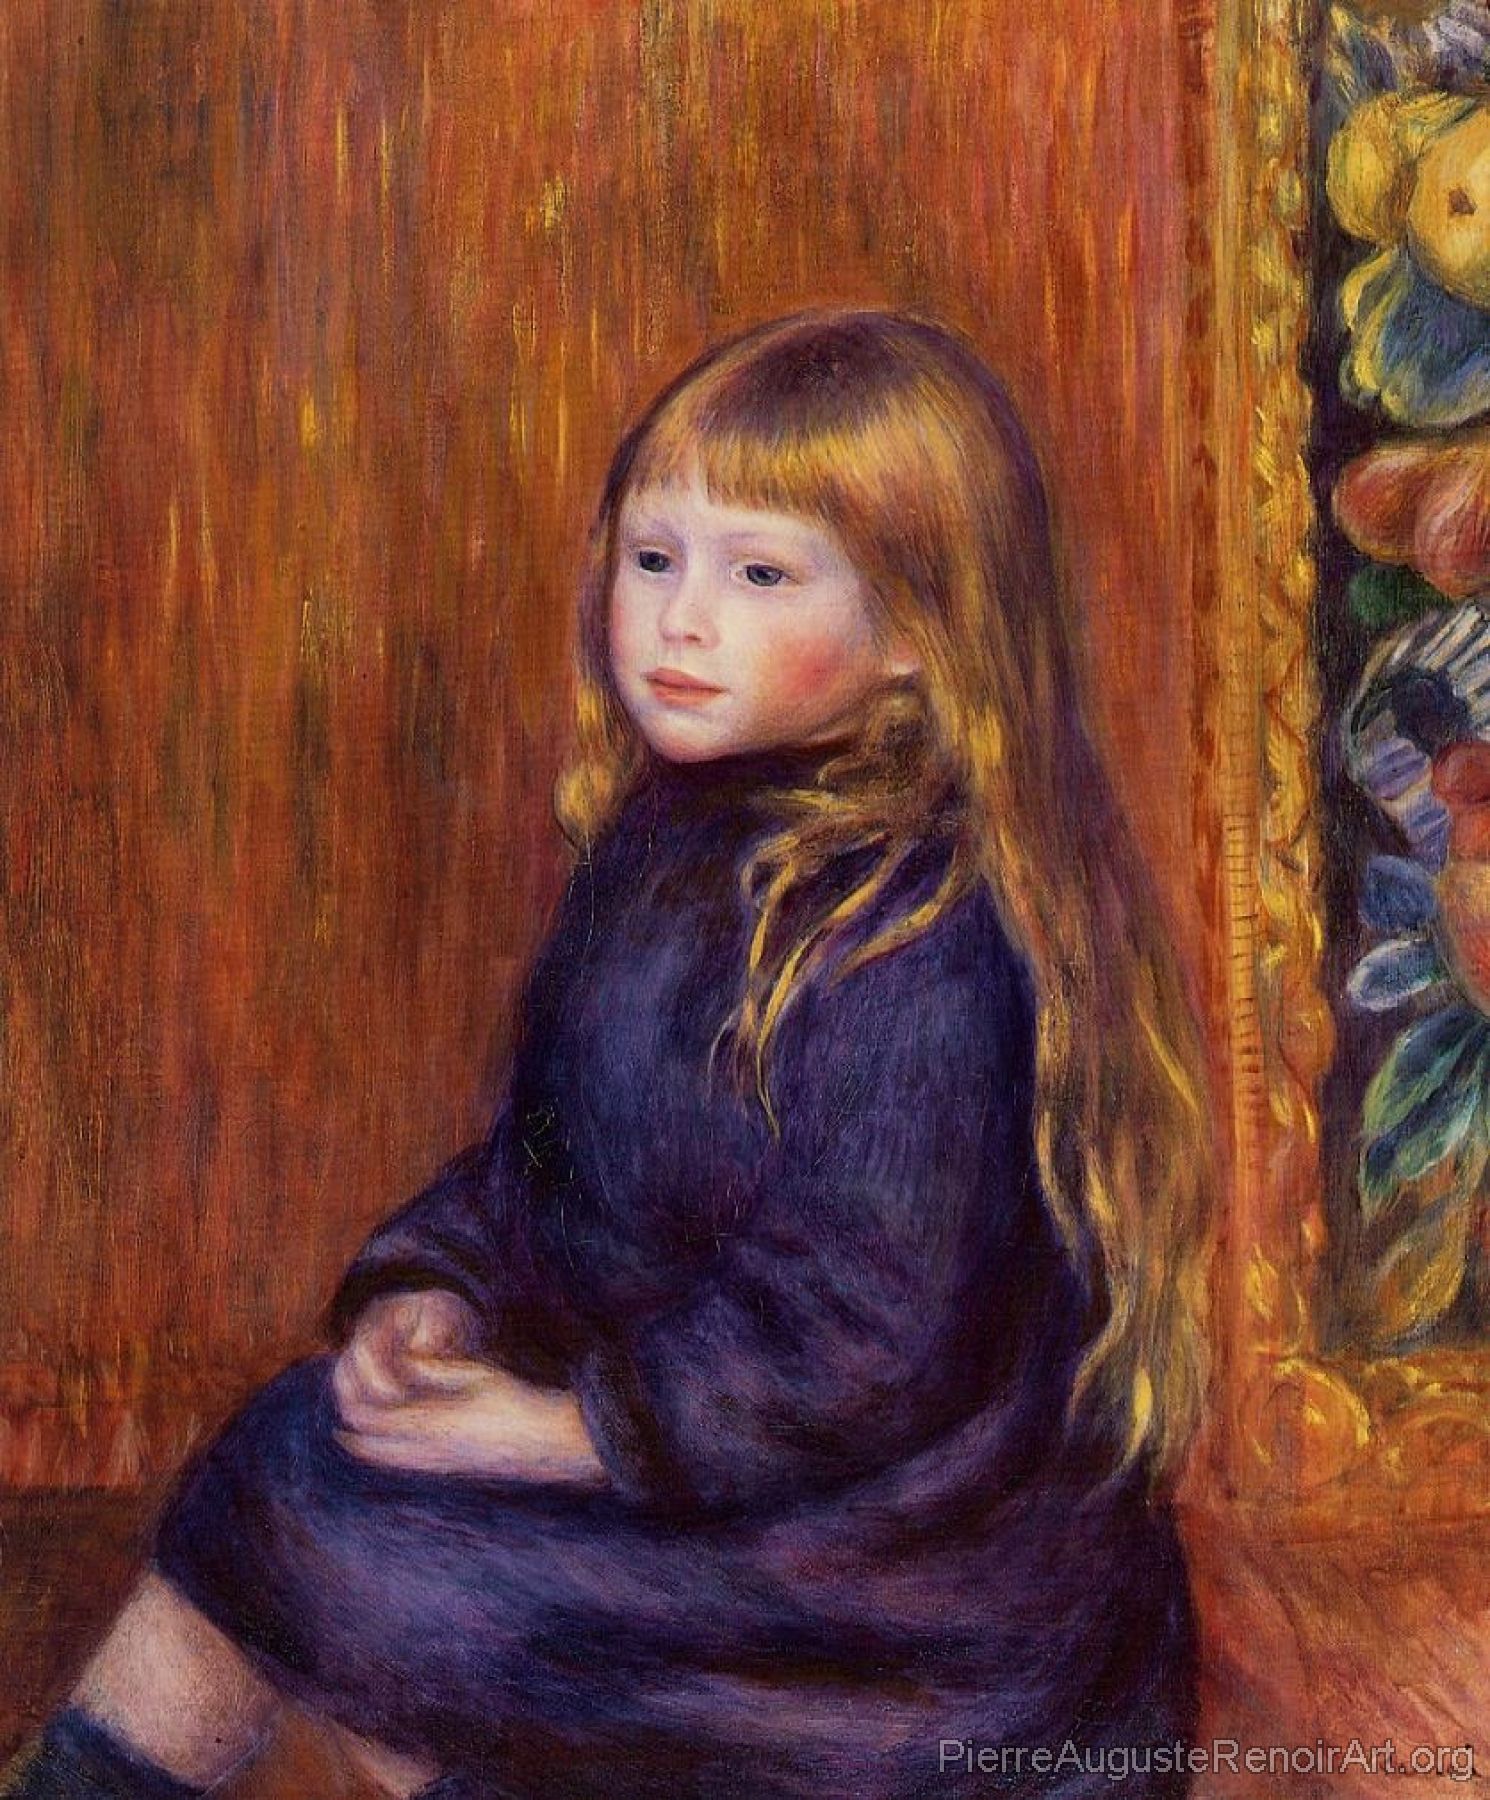 Seated Child in a Blue Dress